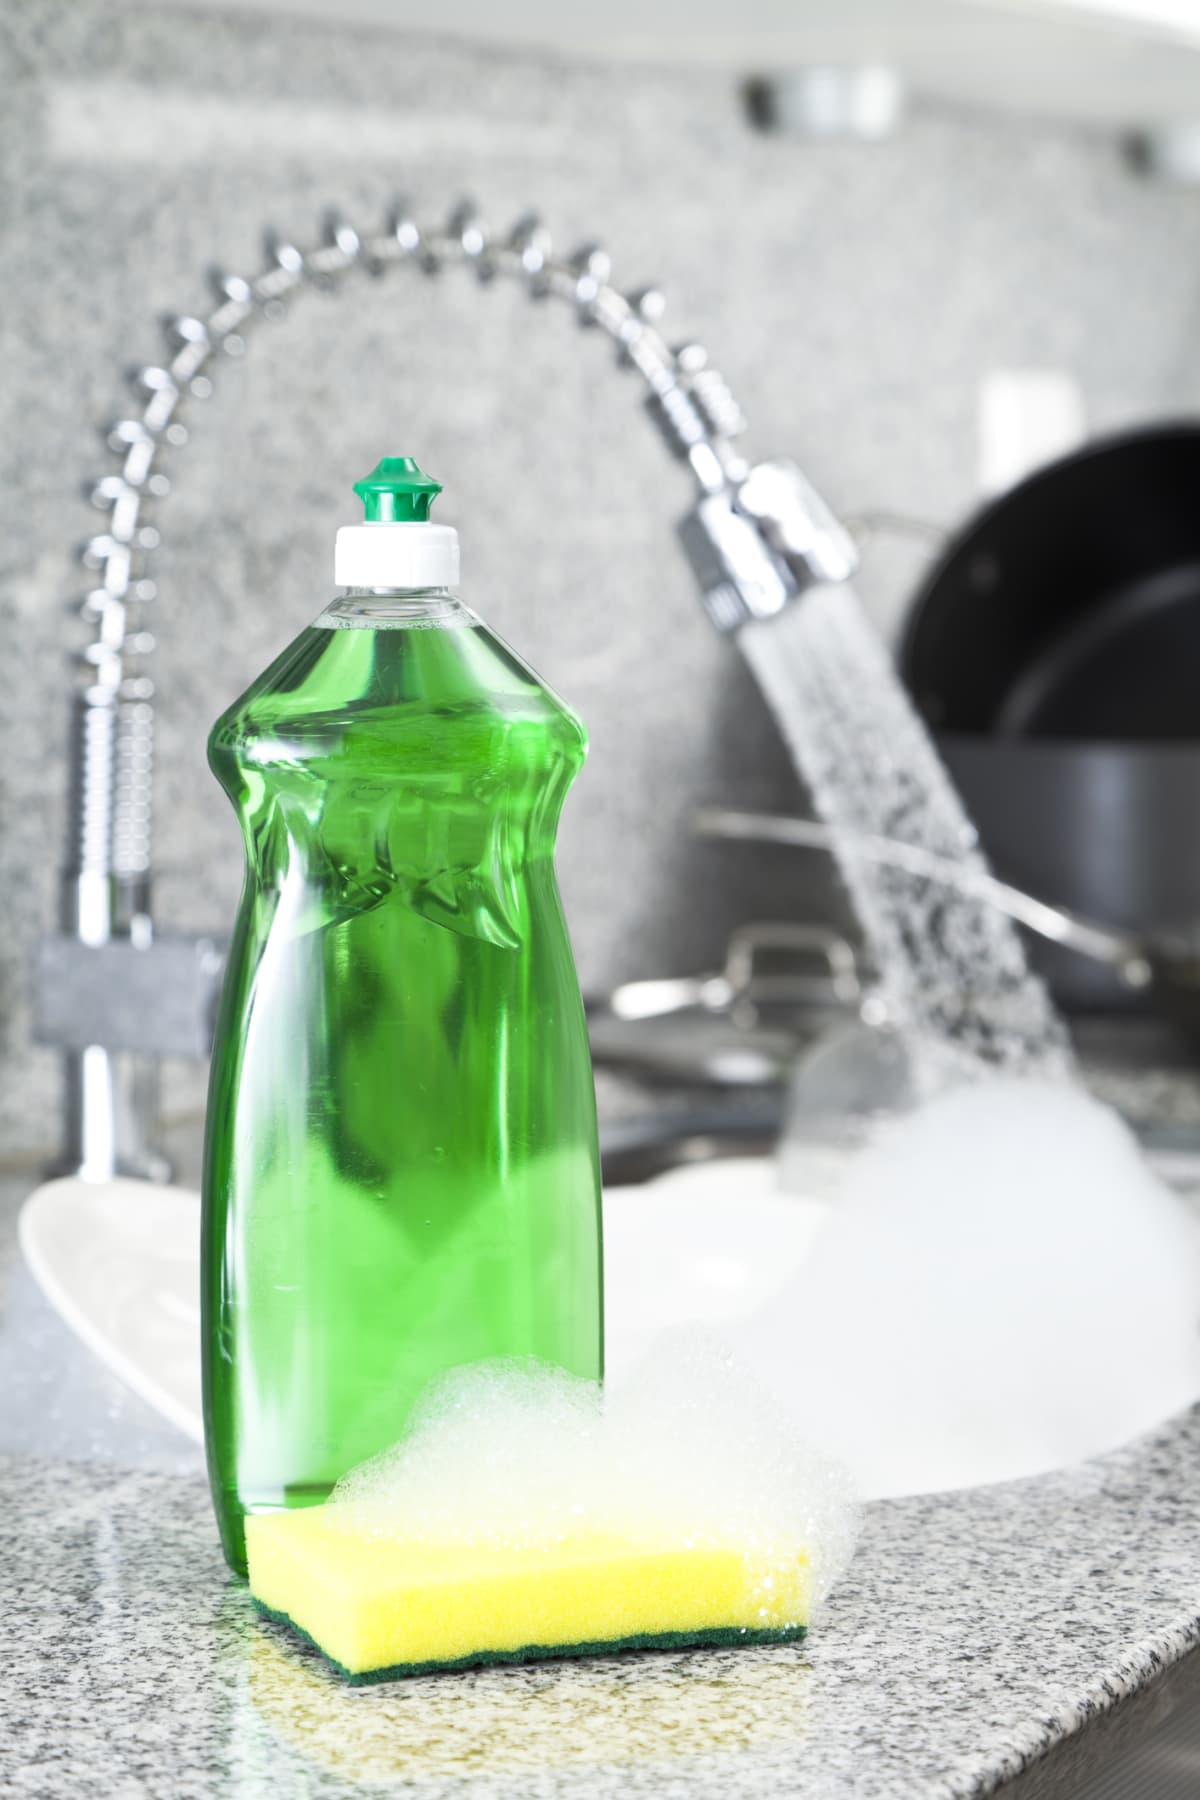 Green Dishwashing Detergent Bottle and Sponge with Kitchen Sink Full of Dirty Dishes in Background